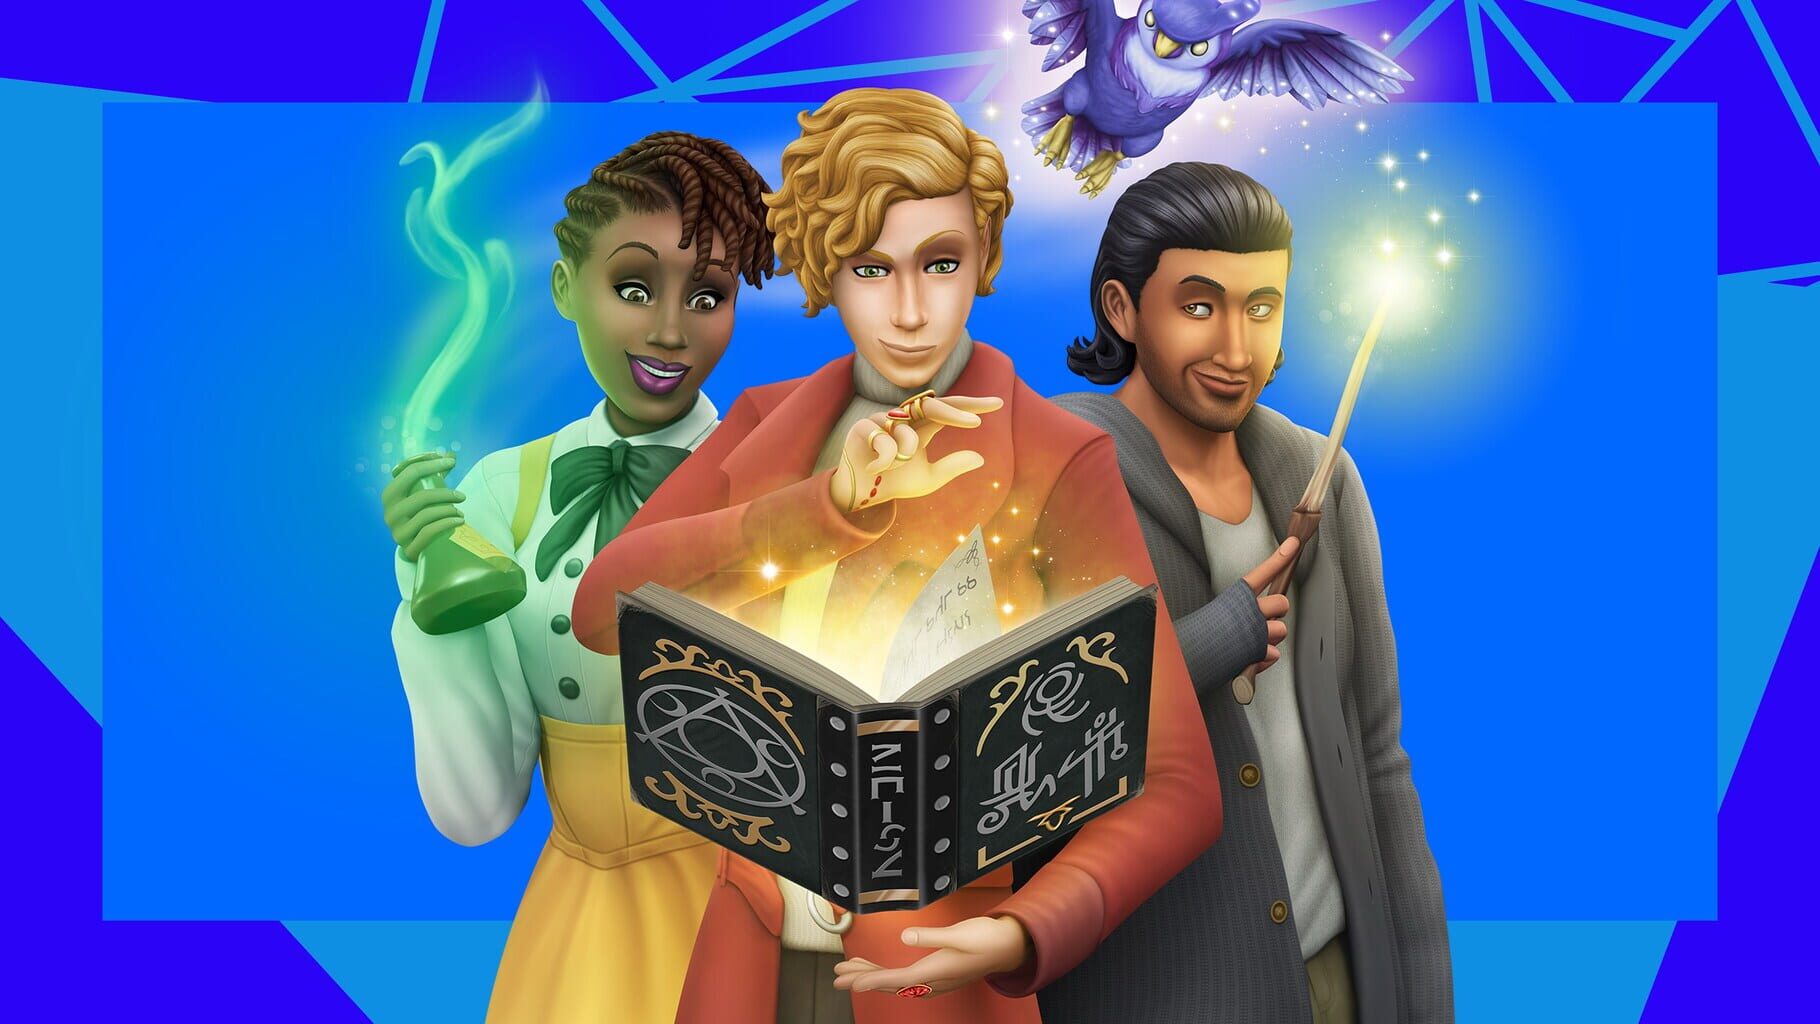 The Sims 4: Realm of Magic Image